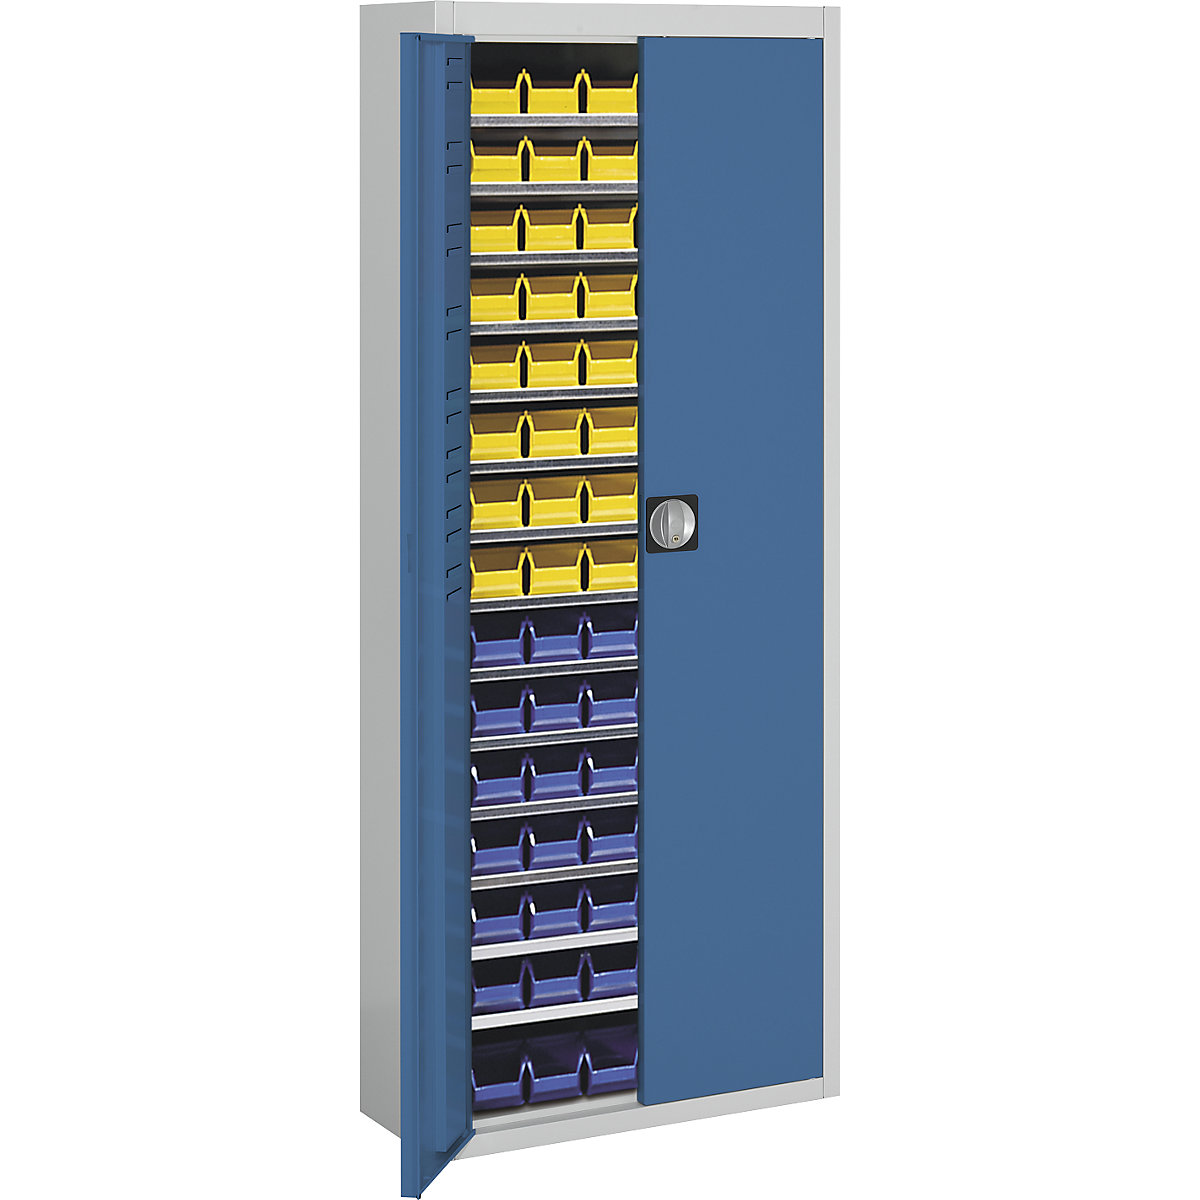 Storage cupboard with open fronted storage bins – mauser, HxWxD 1740 x 680 x 280 mm, two-colour, grey body, blue doors, 90 bins-15